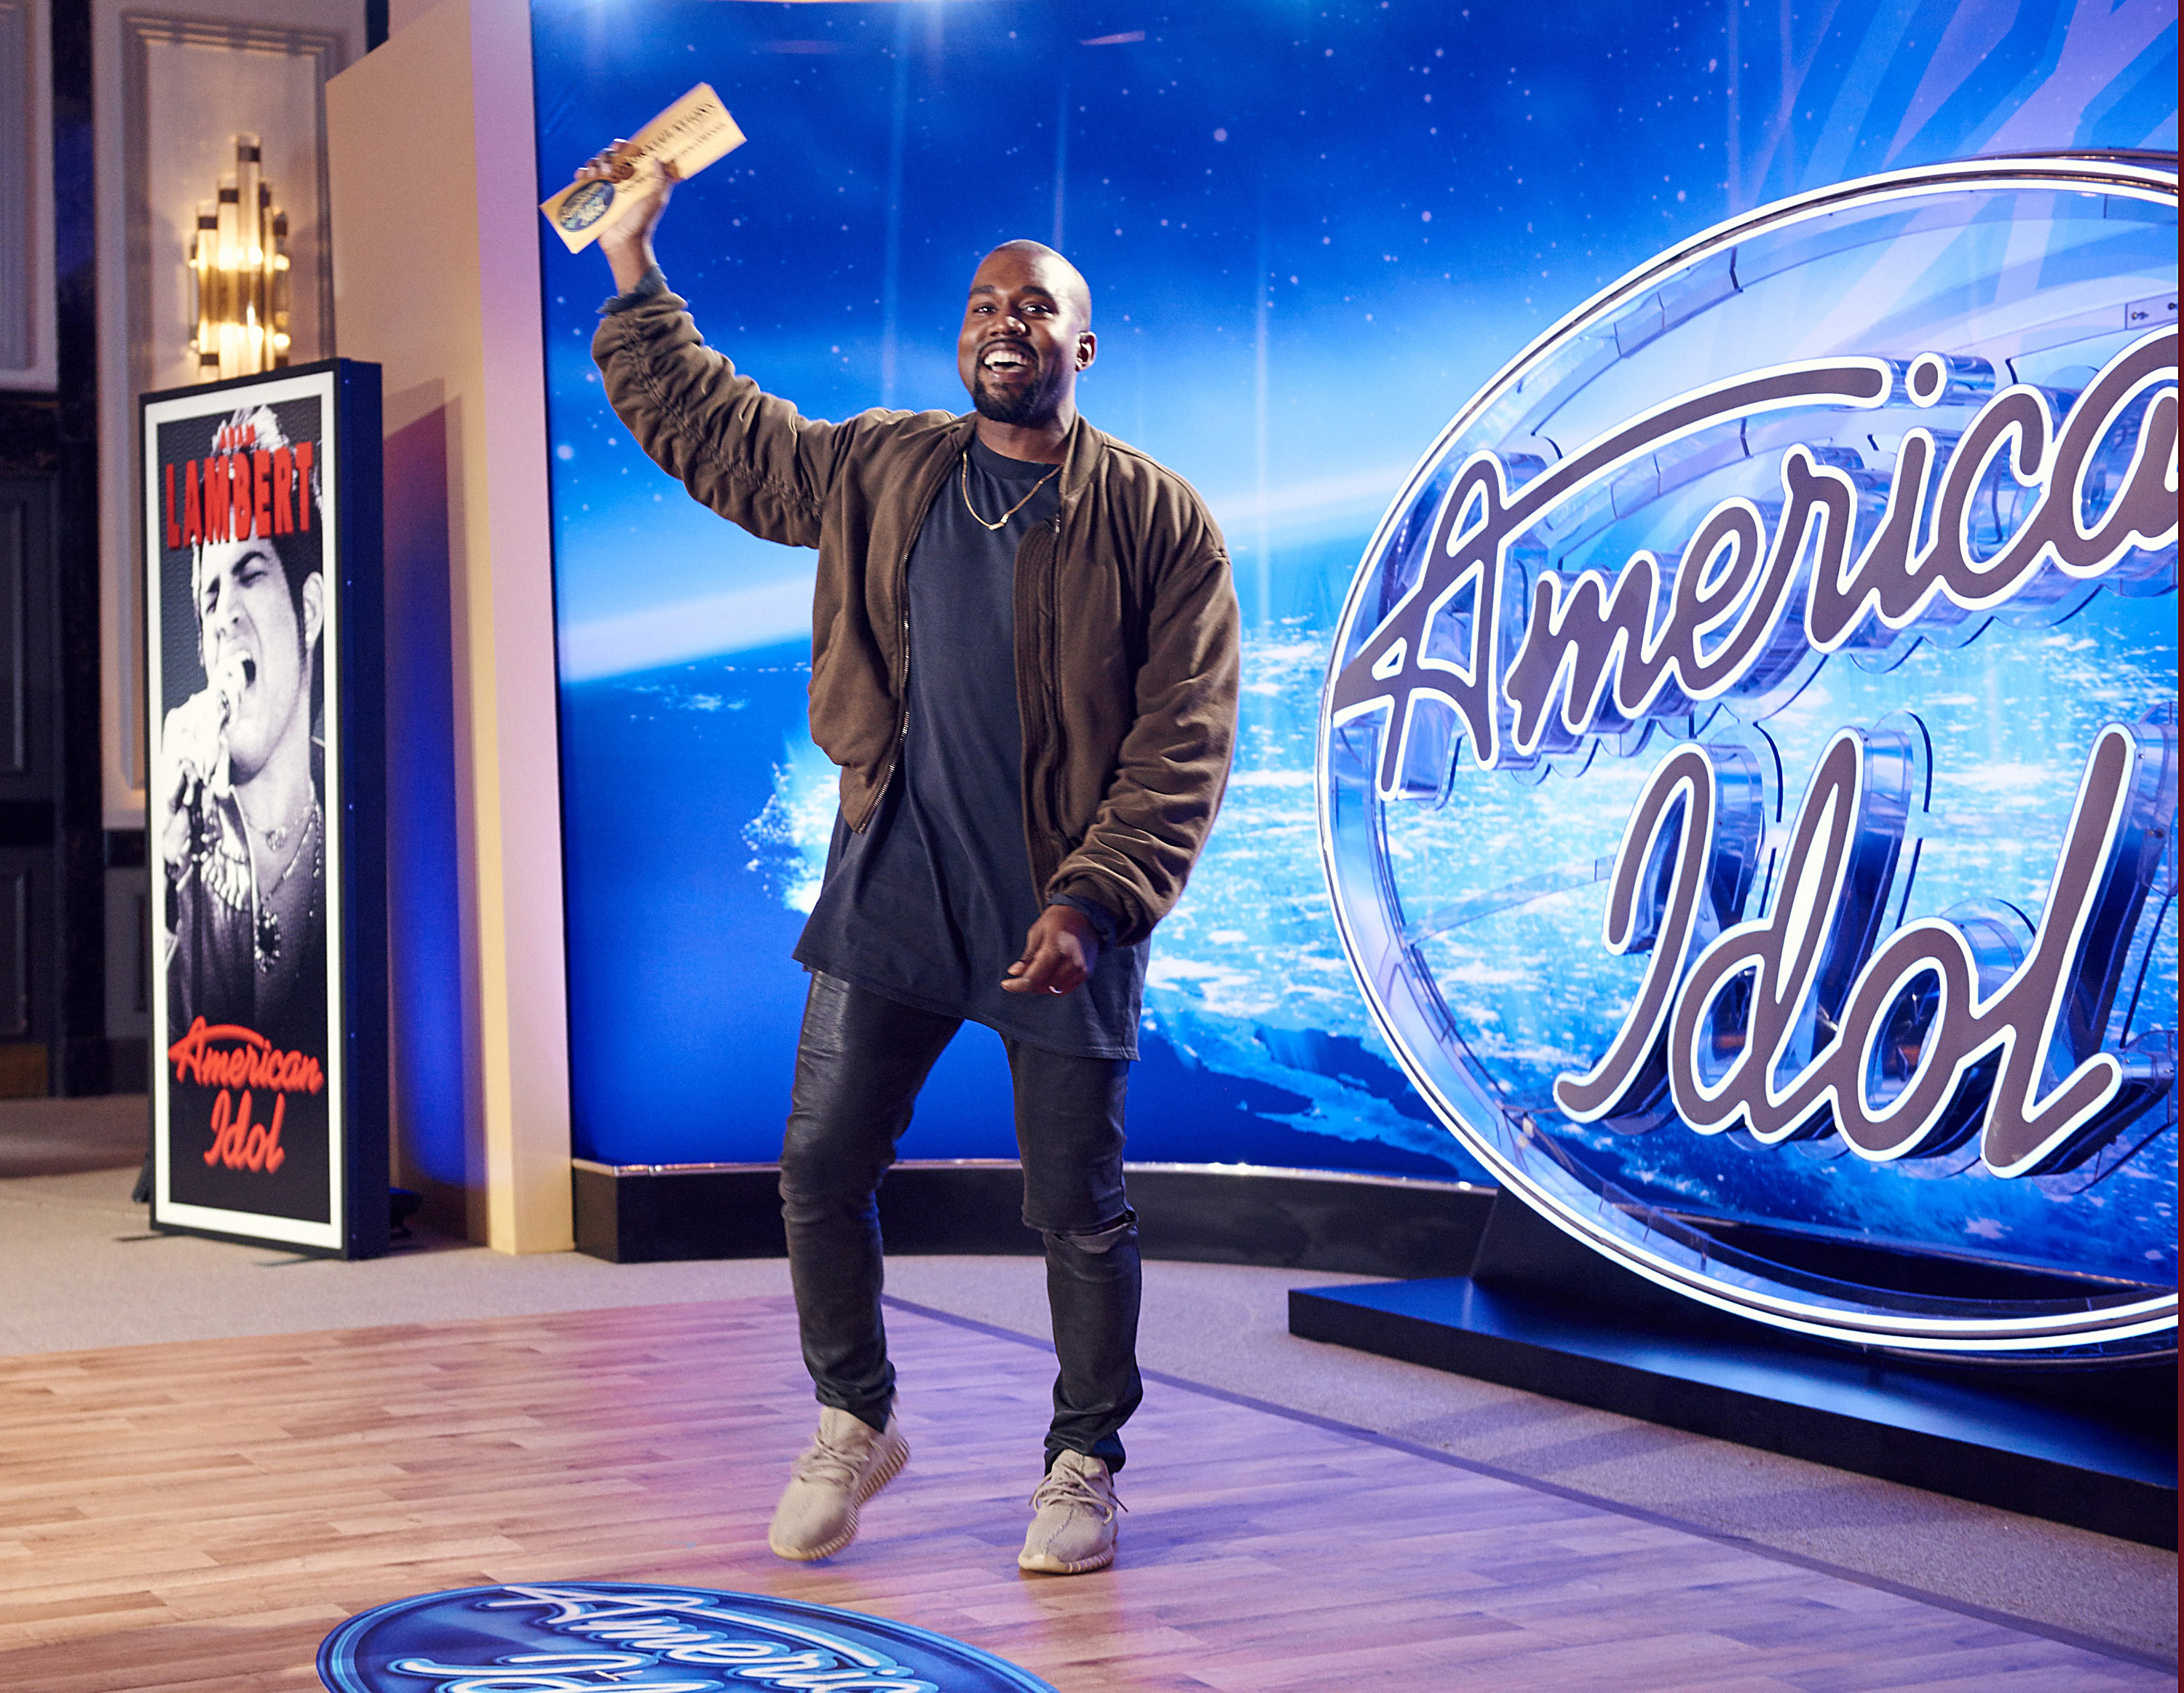 Kanye West surprises the Judges and Ryan Seacrest on American Idol by auditioning in San Francisco on Oct. 10, 2015. (FOX/Getty Images)